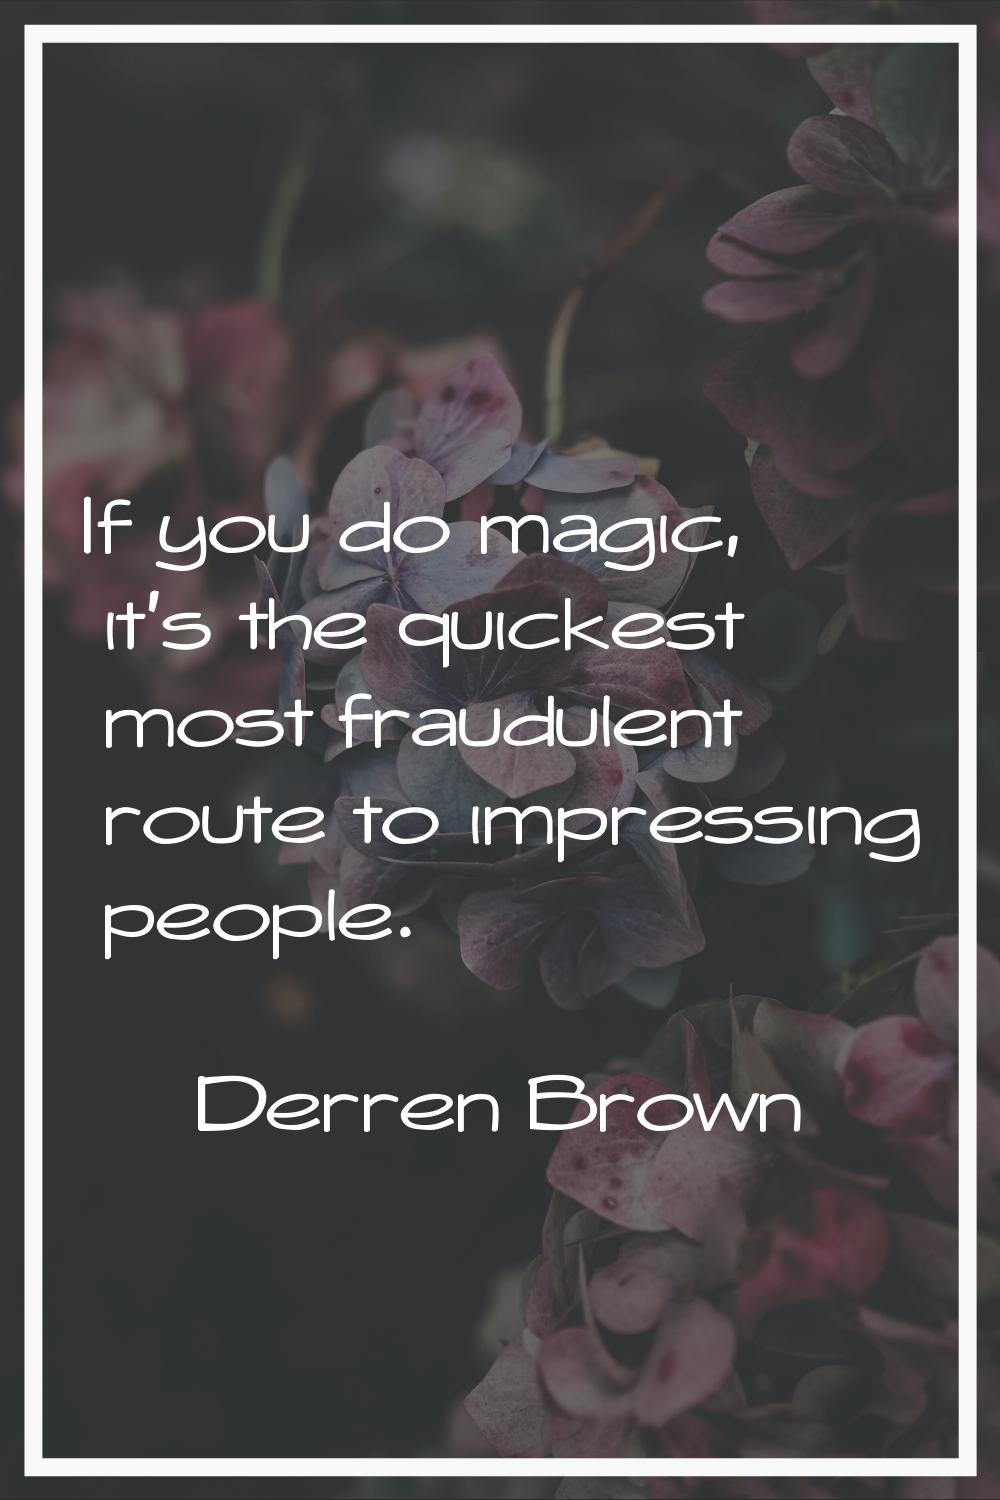 If you do magic, it's the quickest most fraudulent route to impressing people.